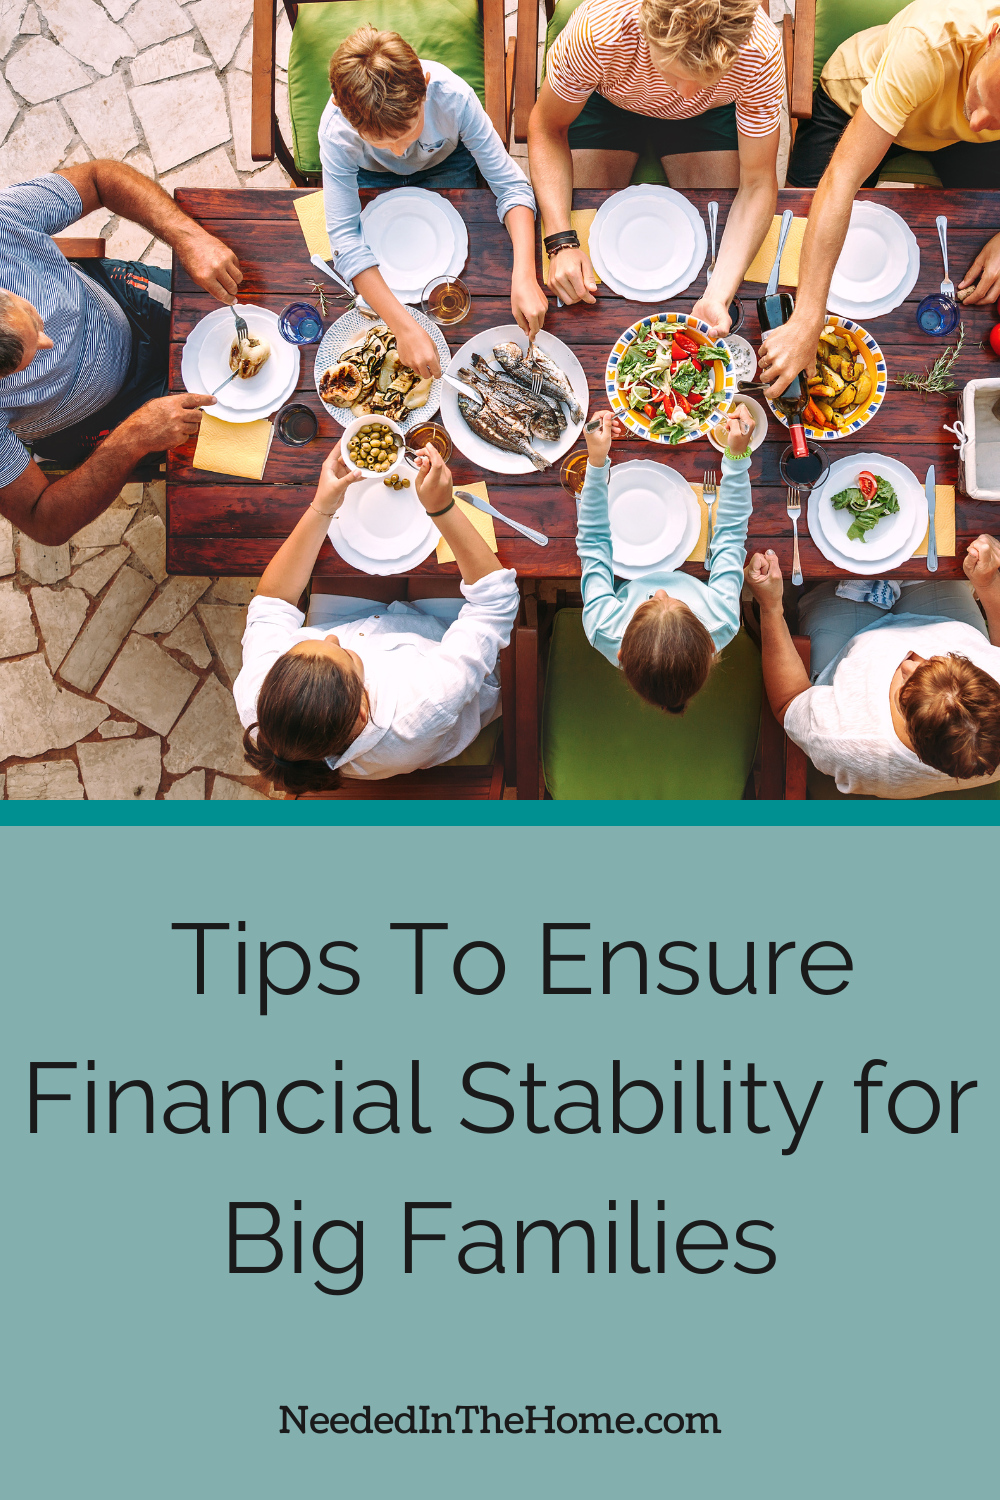 pinterest pin description tips to ensure financial stability for big families large family of seven eating at a picnic table outside neededinthehome